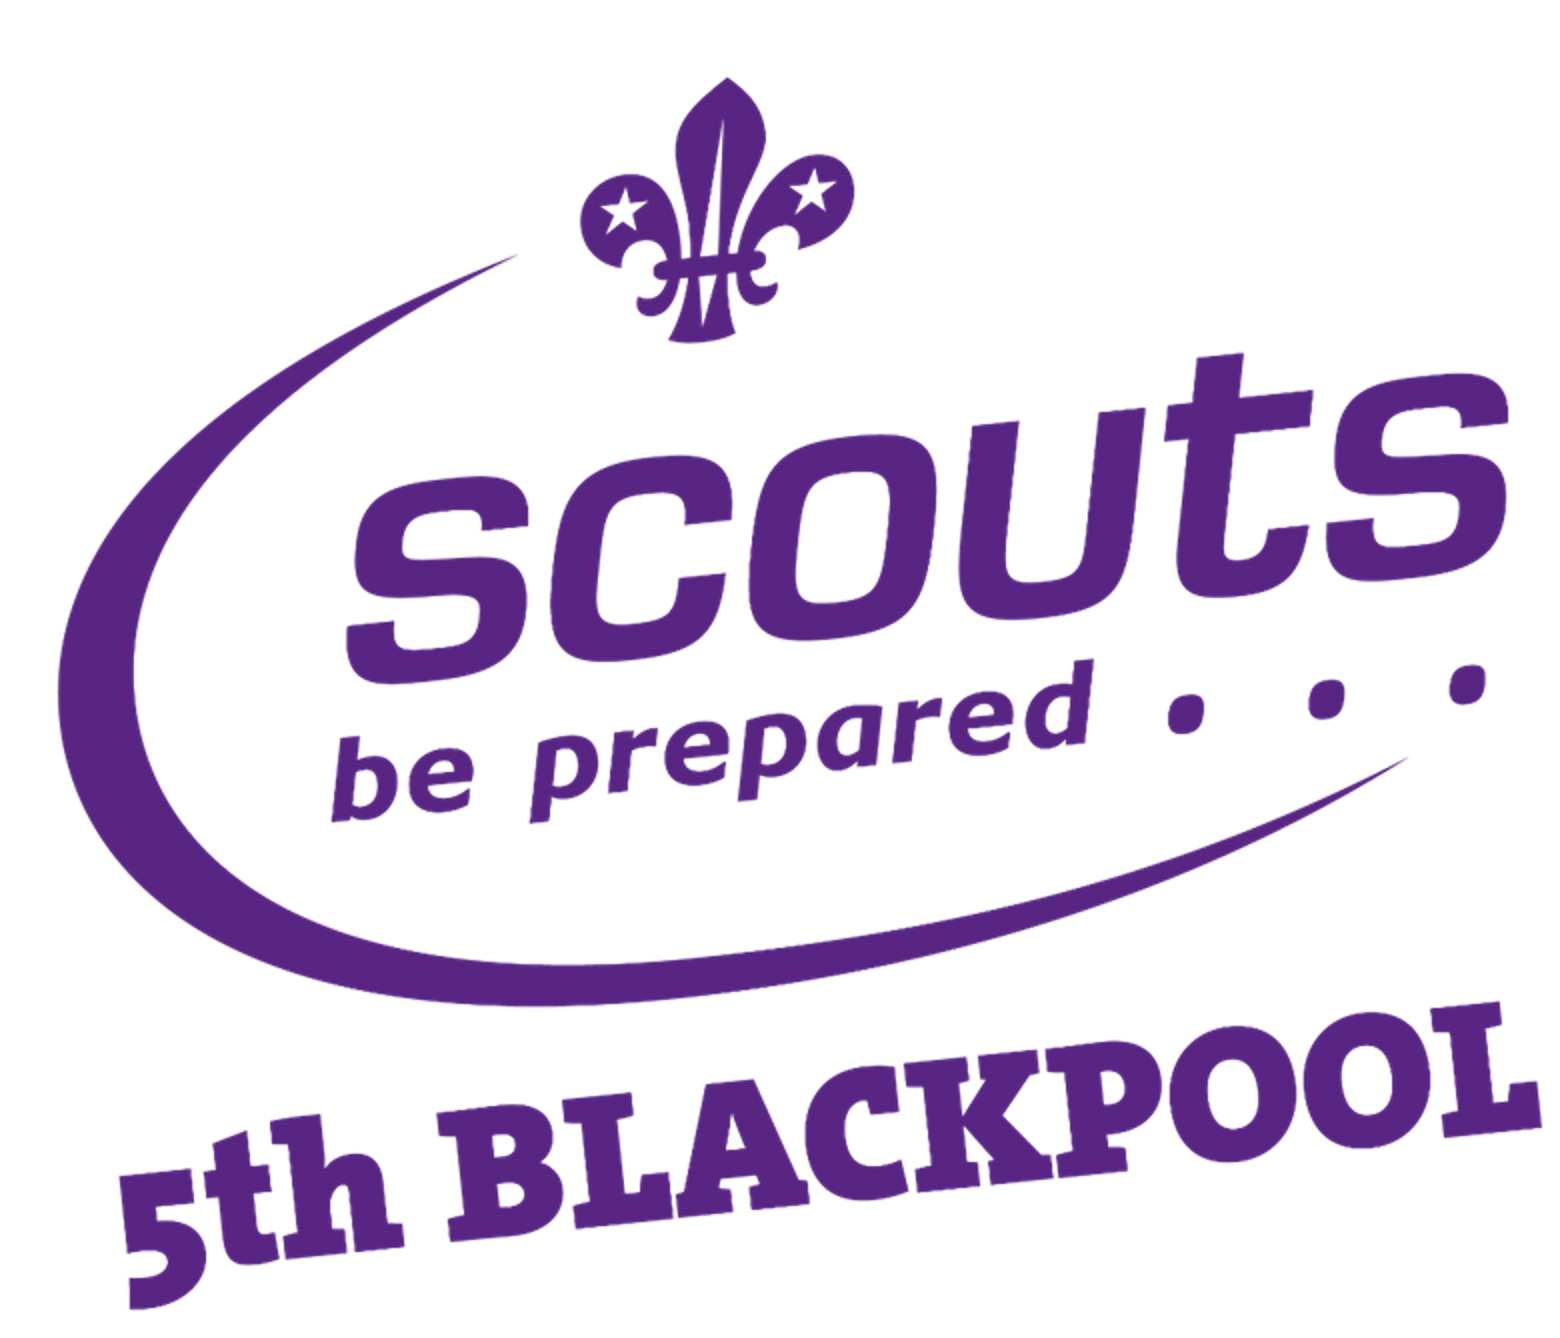 5th Blackpool Scout Group